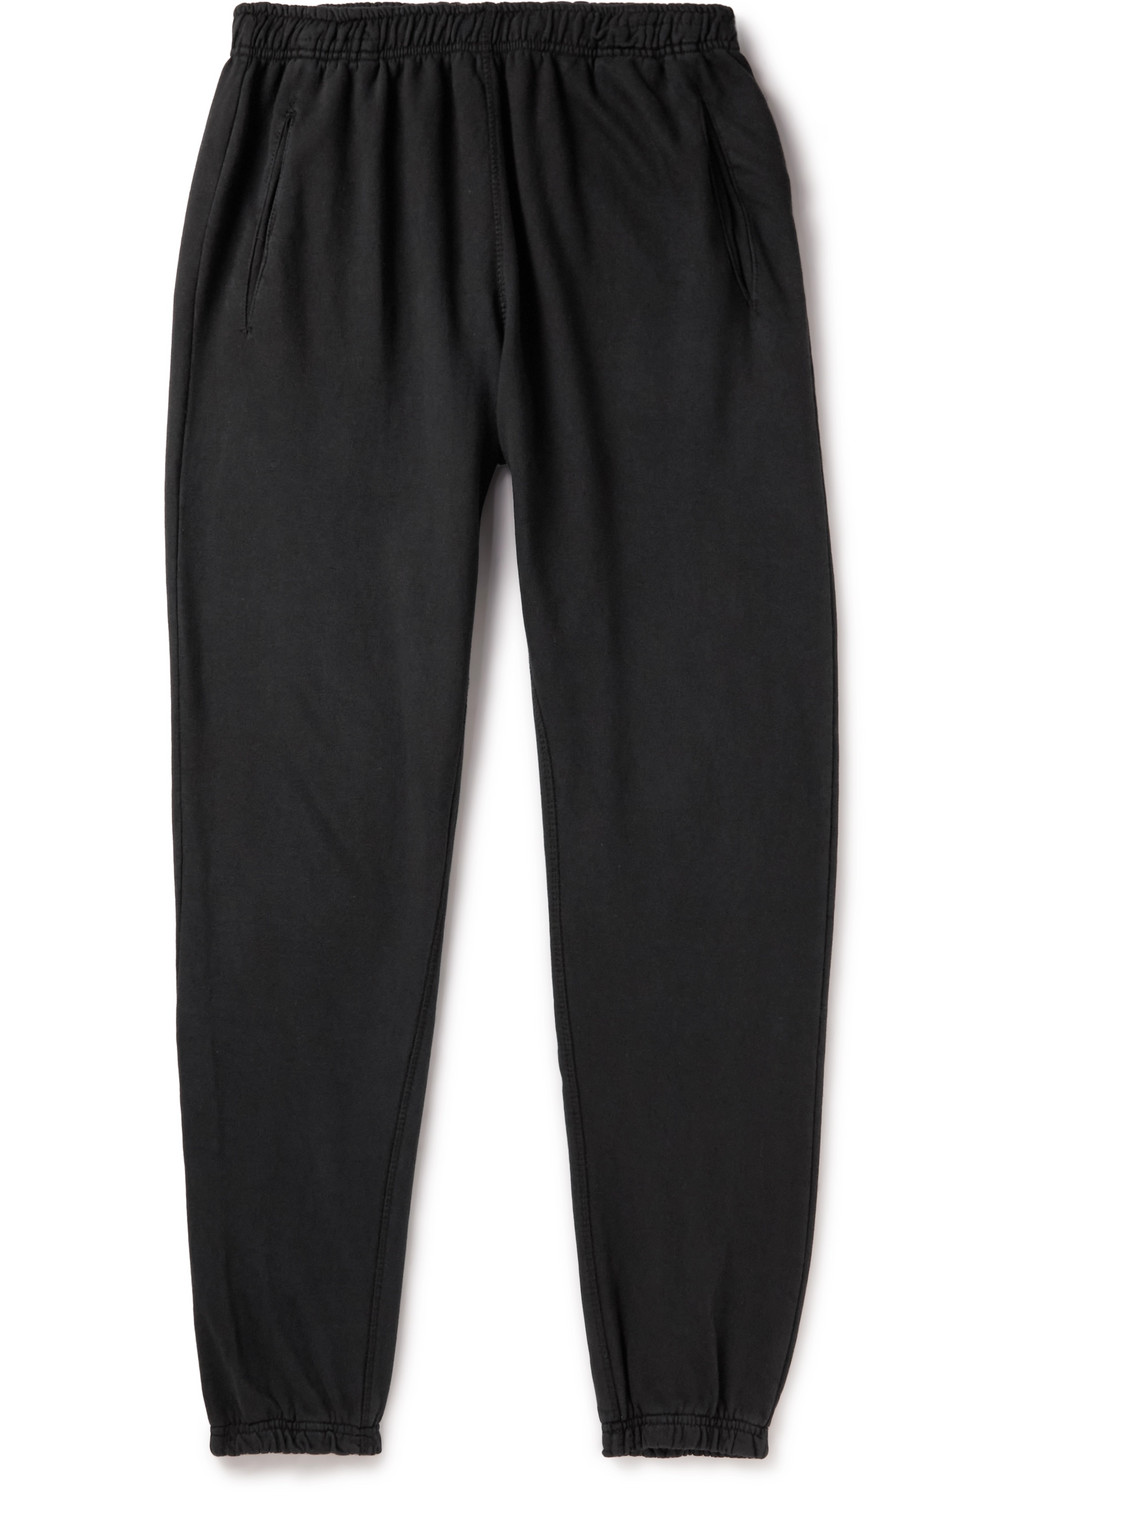 ONIA TAPERED GARMENT-DYED COTTON-BLEND JERSEY SWEATPANTS